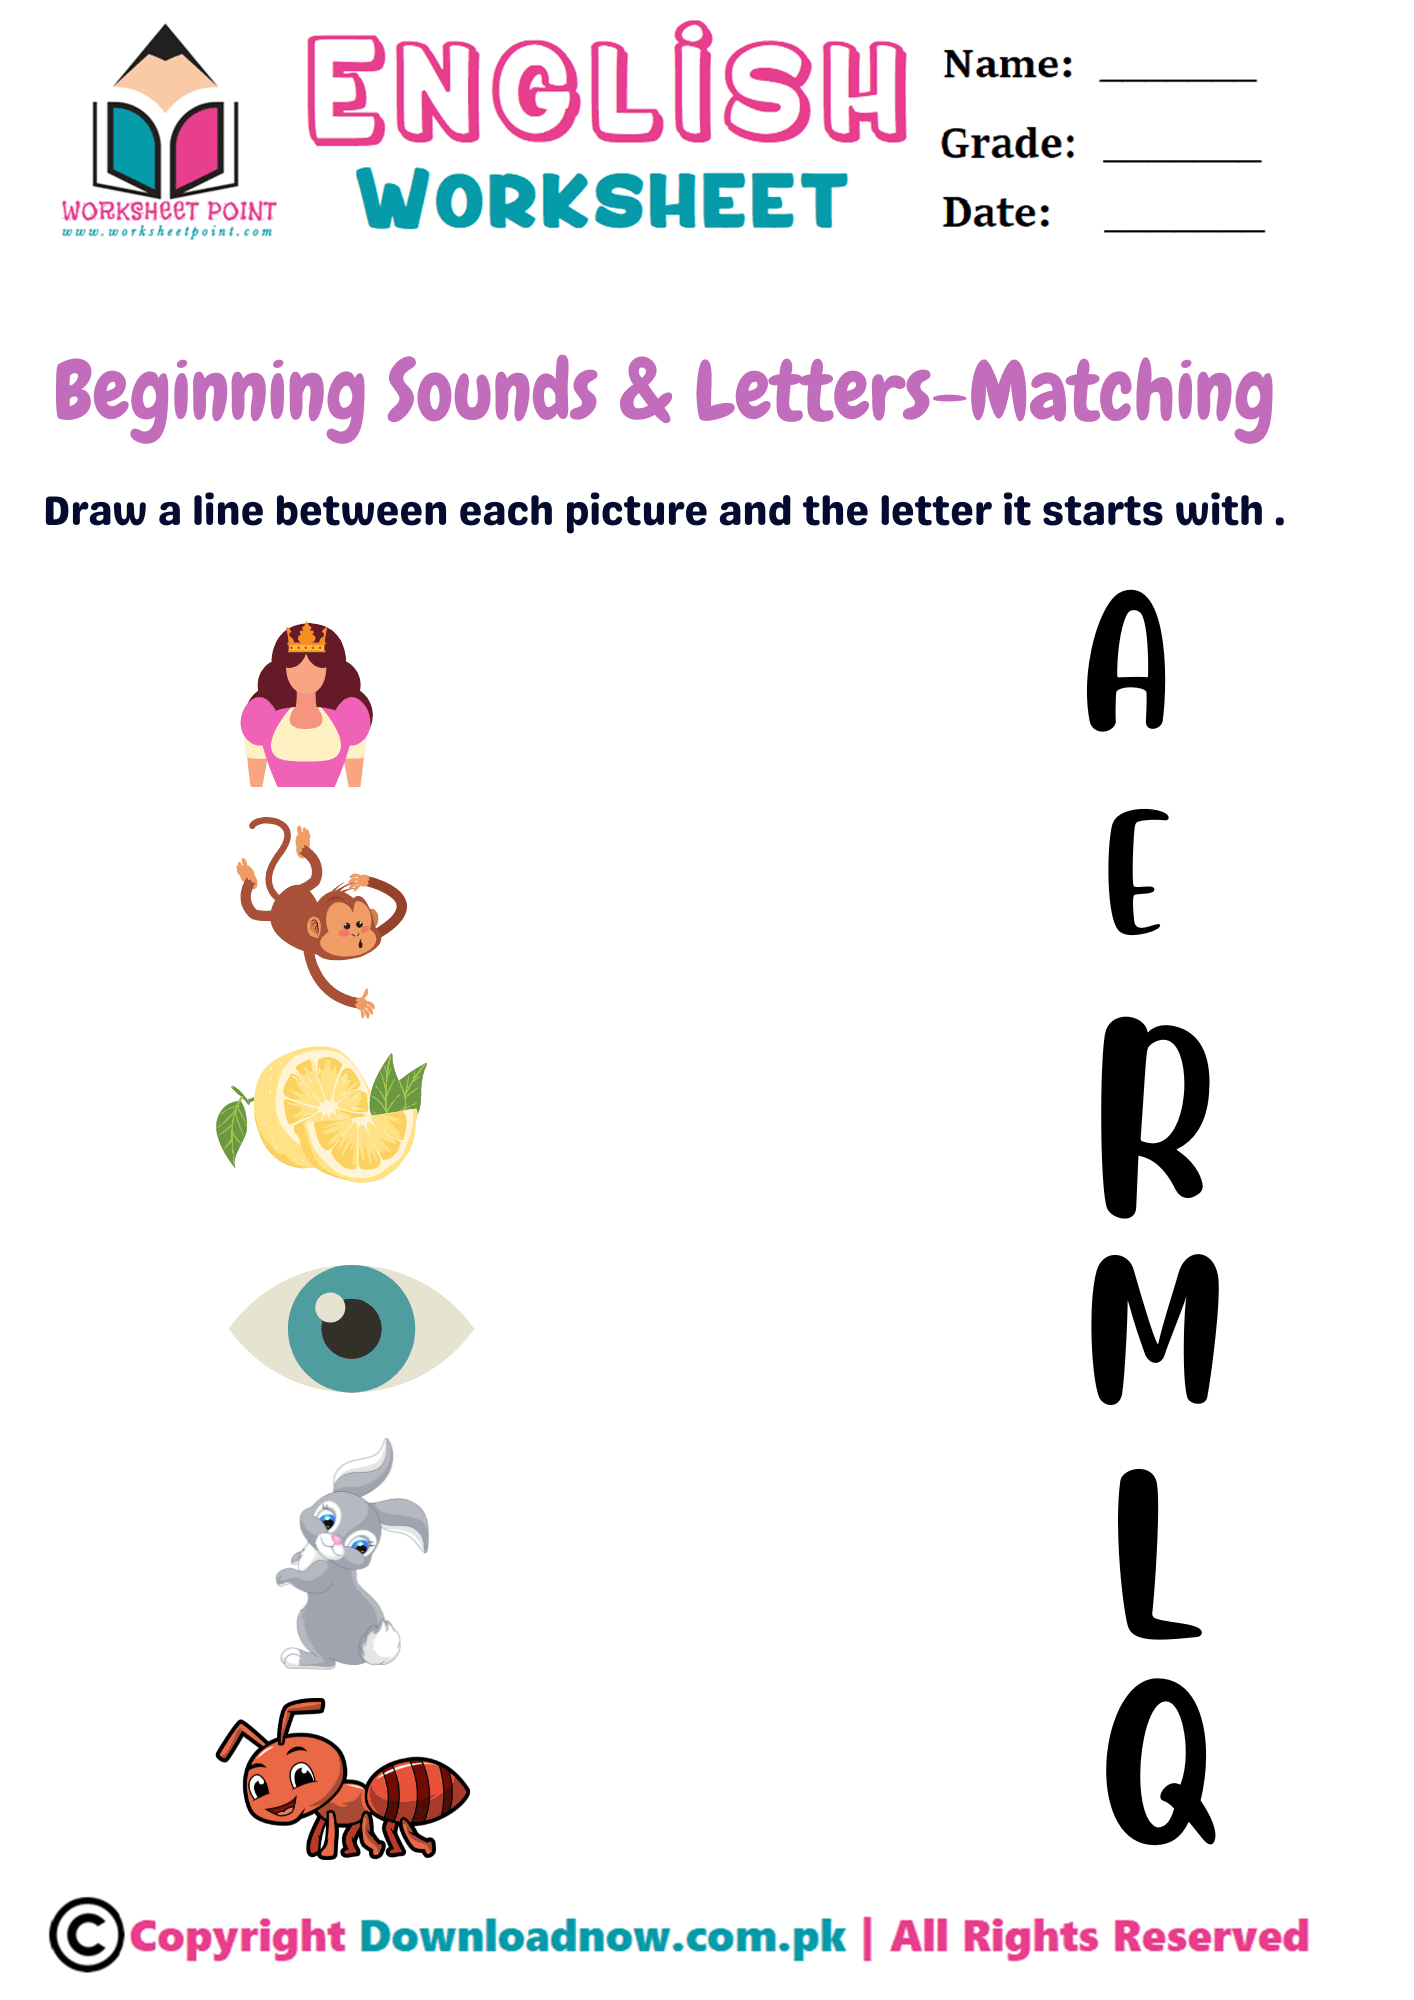 Rich Results on Google's SERP when searching for 'beginning sounds and letters matching (e)'